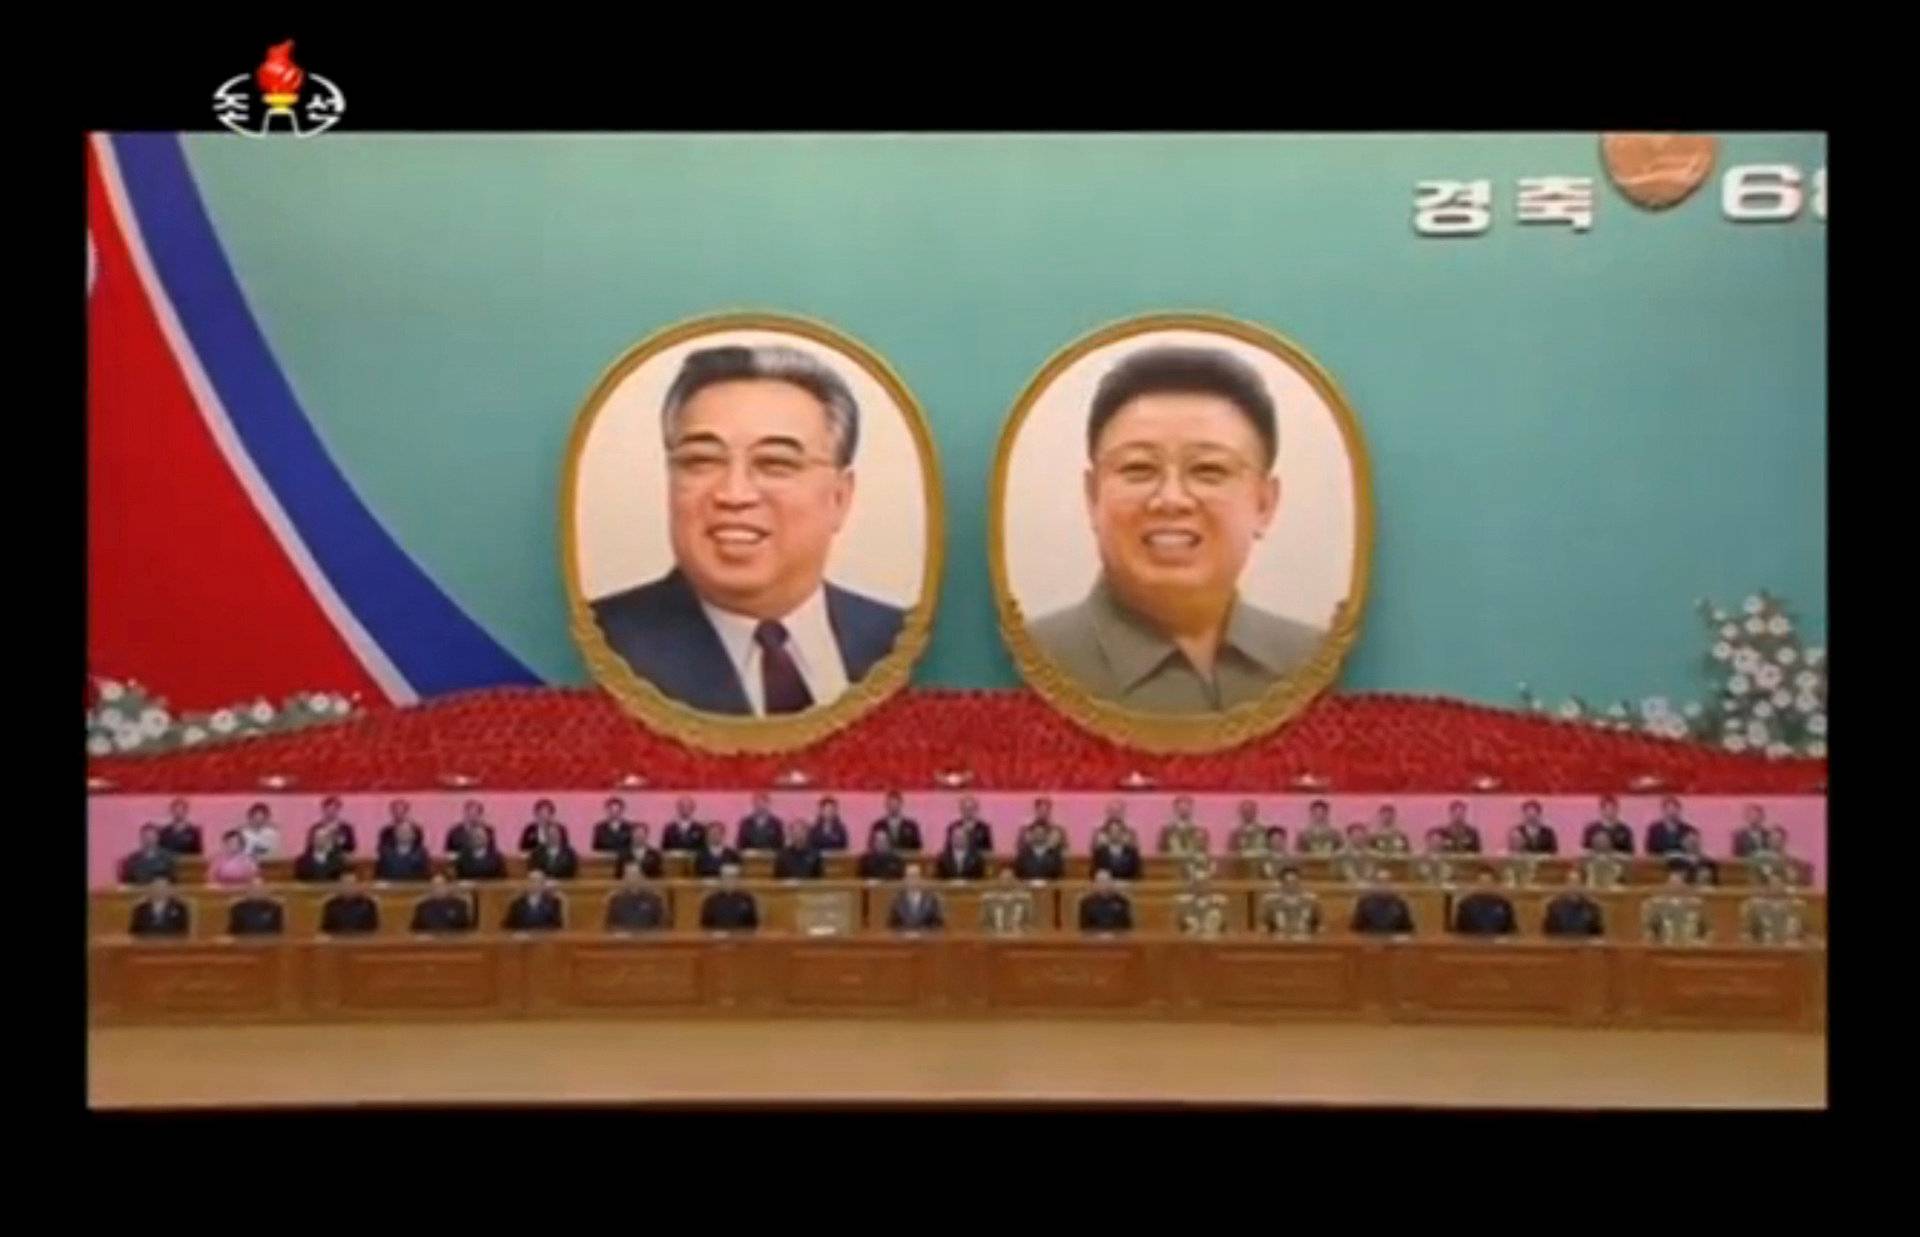 North Korean officials gather for foundation anniversary of North Korea in this still frame taken from video released on September 9, 2016 by North Korean state-run television KRT of a massive indoor rally in Pyongyang